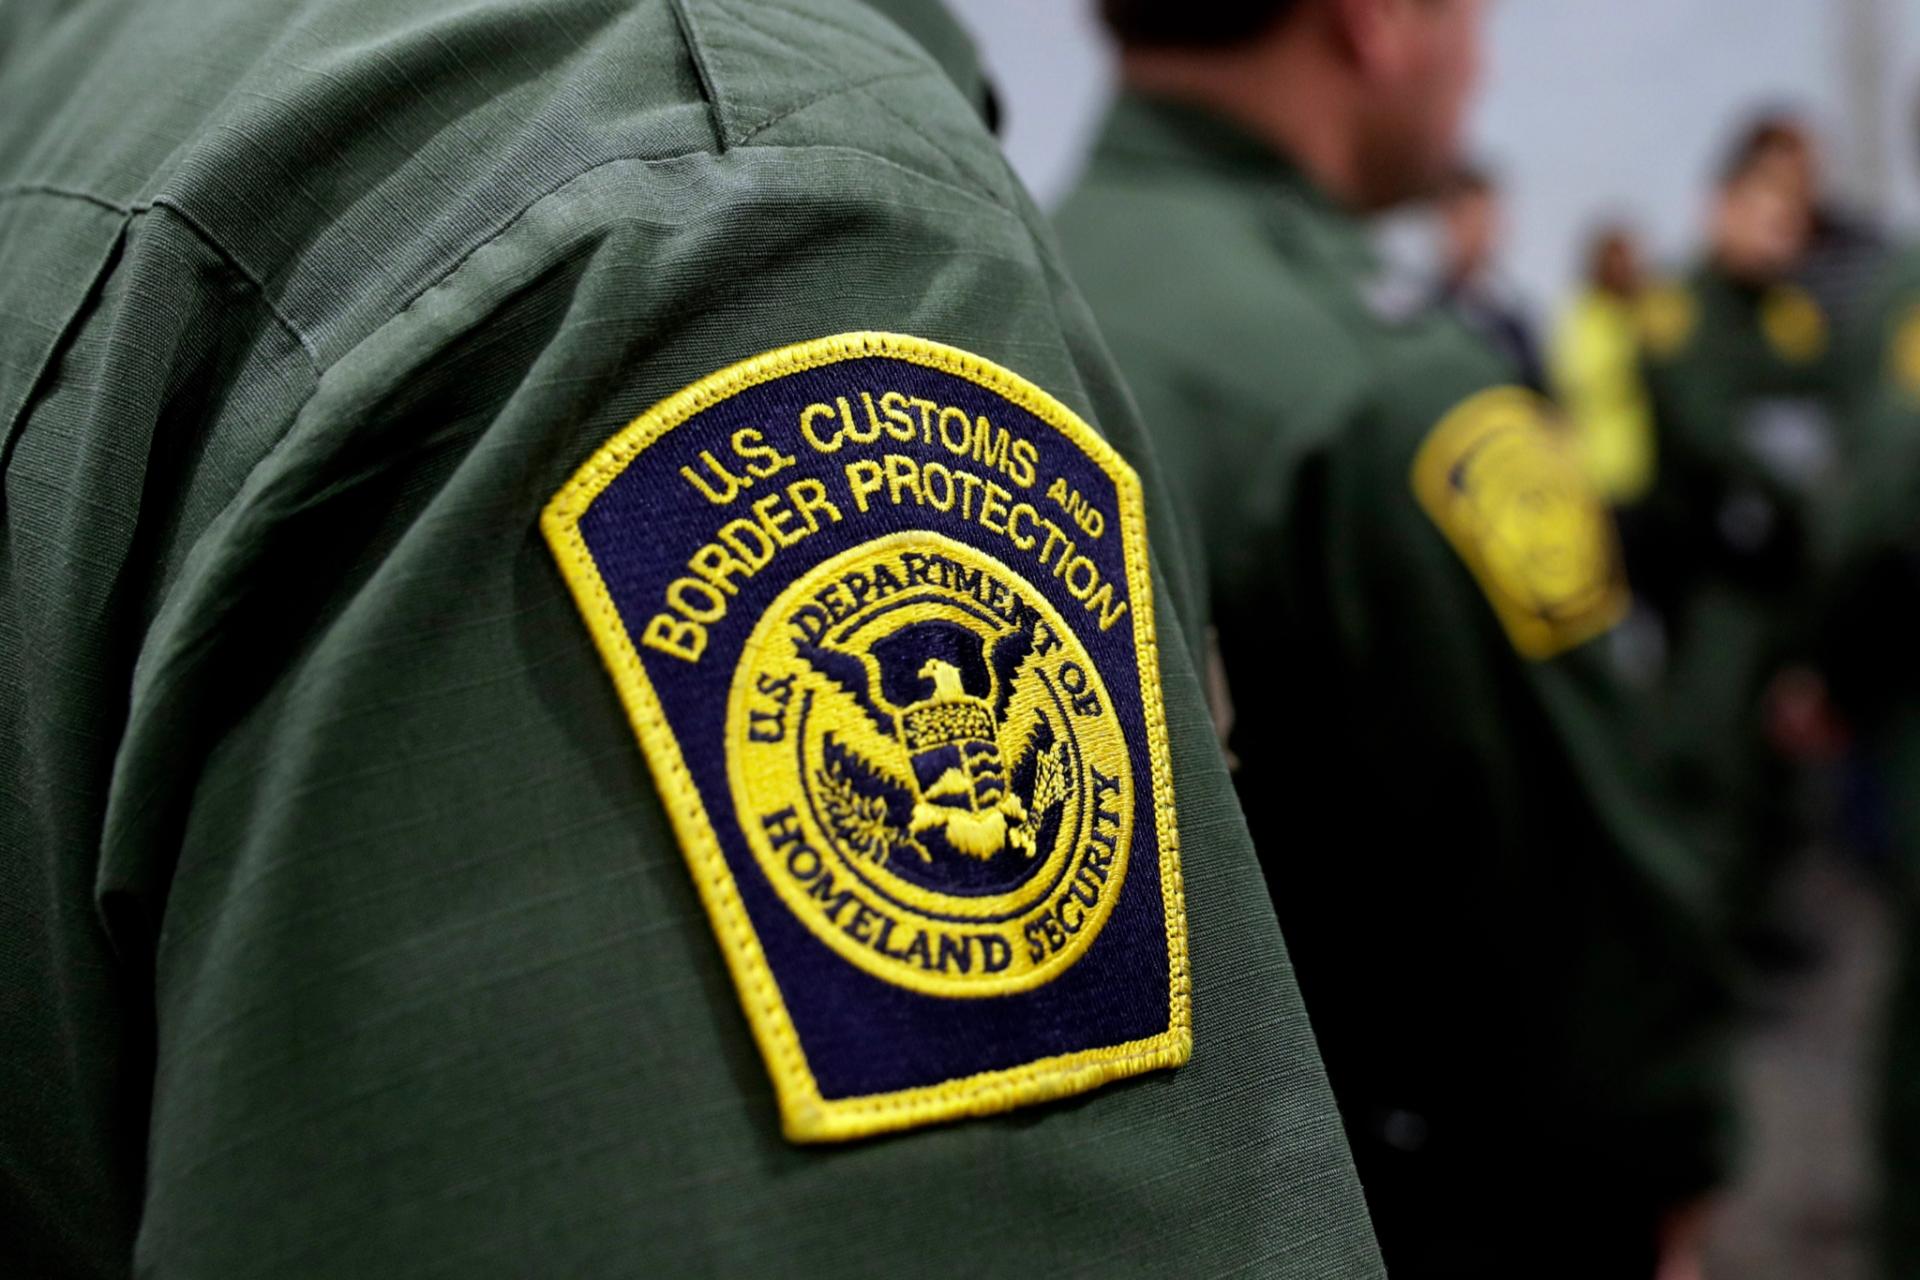 HLS.Today CBP Weekly Recap Captures of 9 Gang Members, 3 sex Offenders and 2 Wanted Migrants